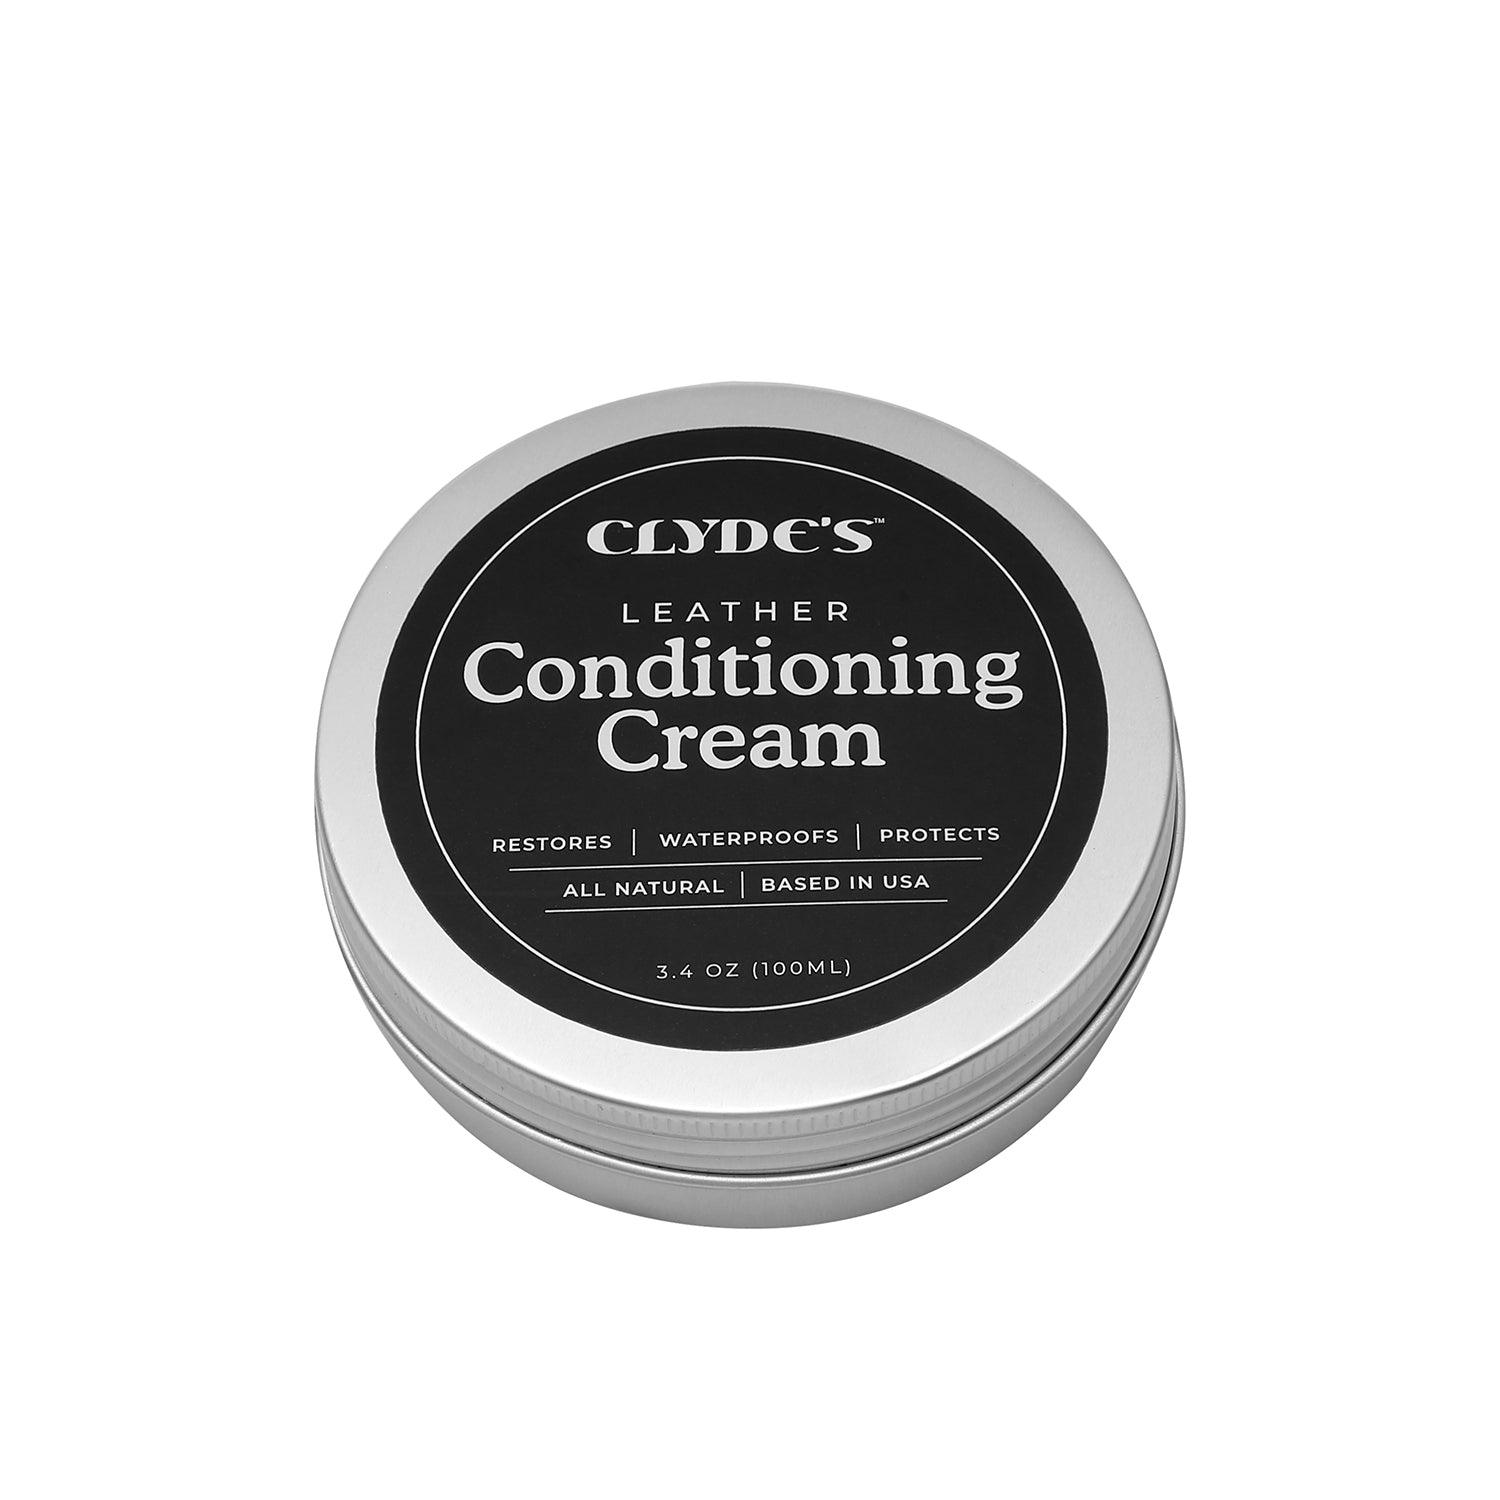 Leather Care Cream Deep Nourishing Leather Recoloring Balm Leather